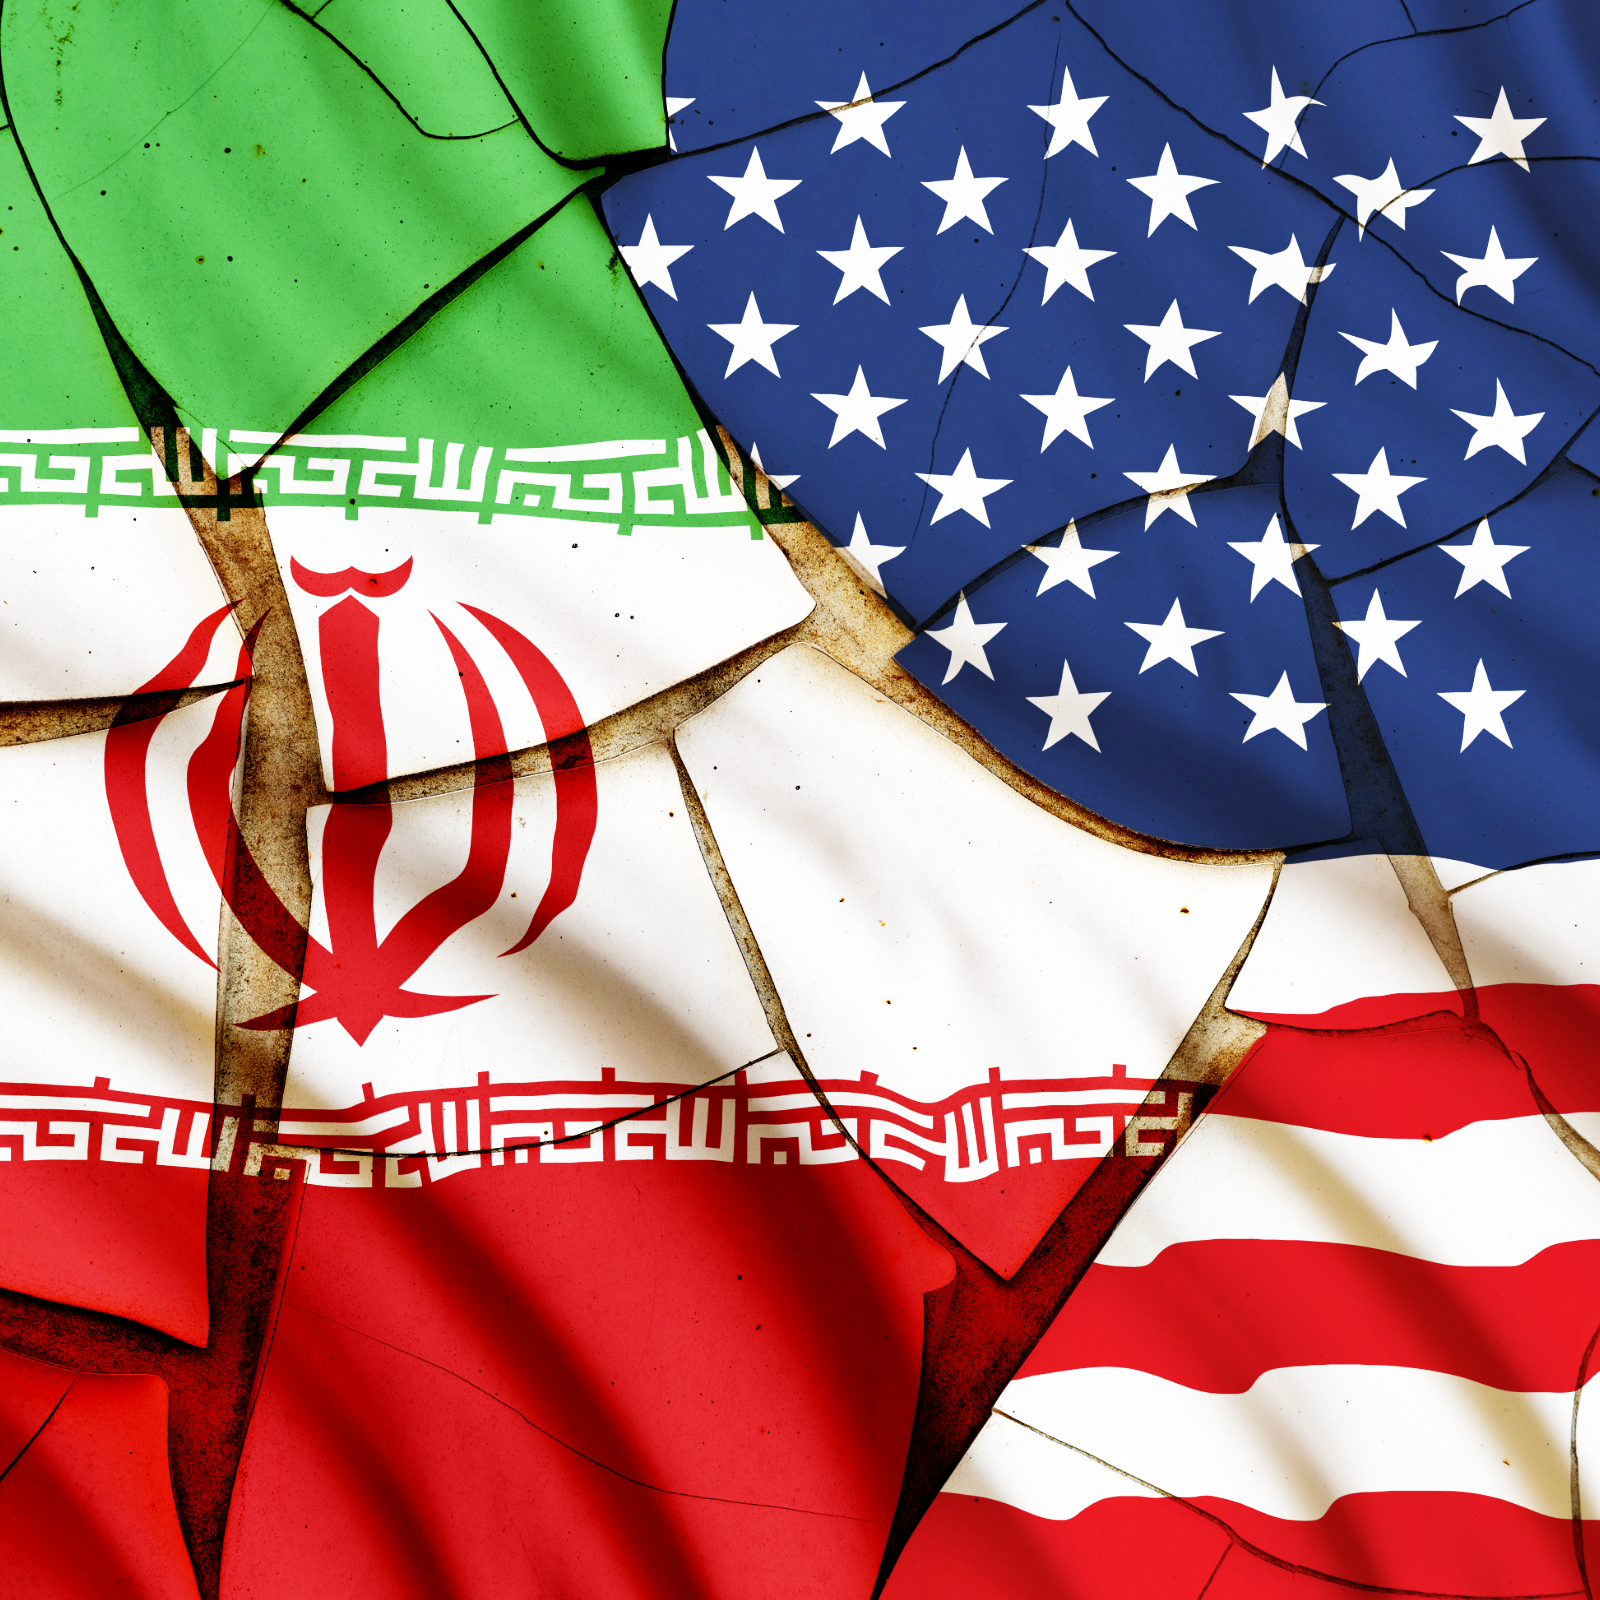 Over 500 BTC Belonging to Iranians Seized by US Government: Report